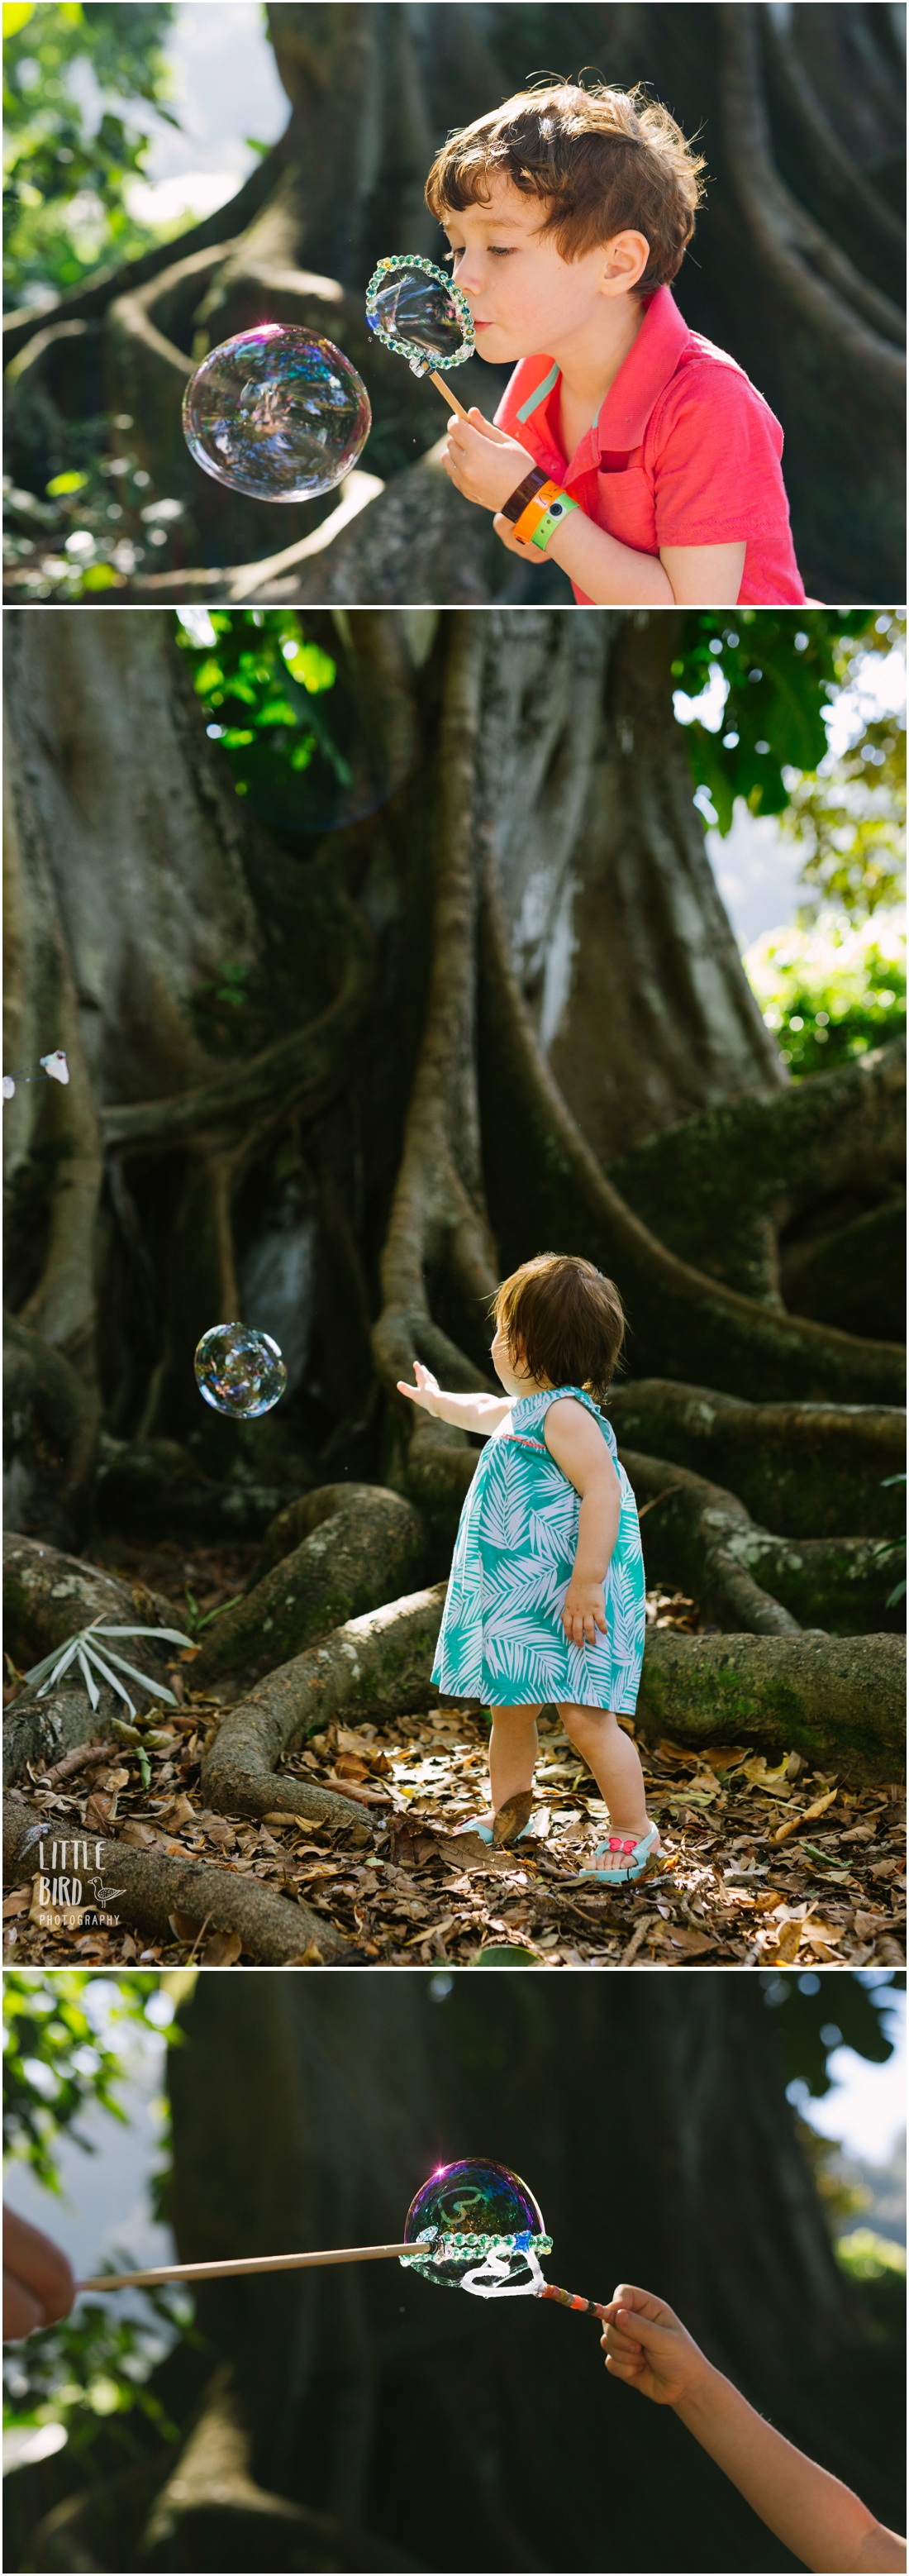 girl playing with bubbles in a tropical park in hawaii